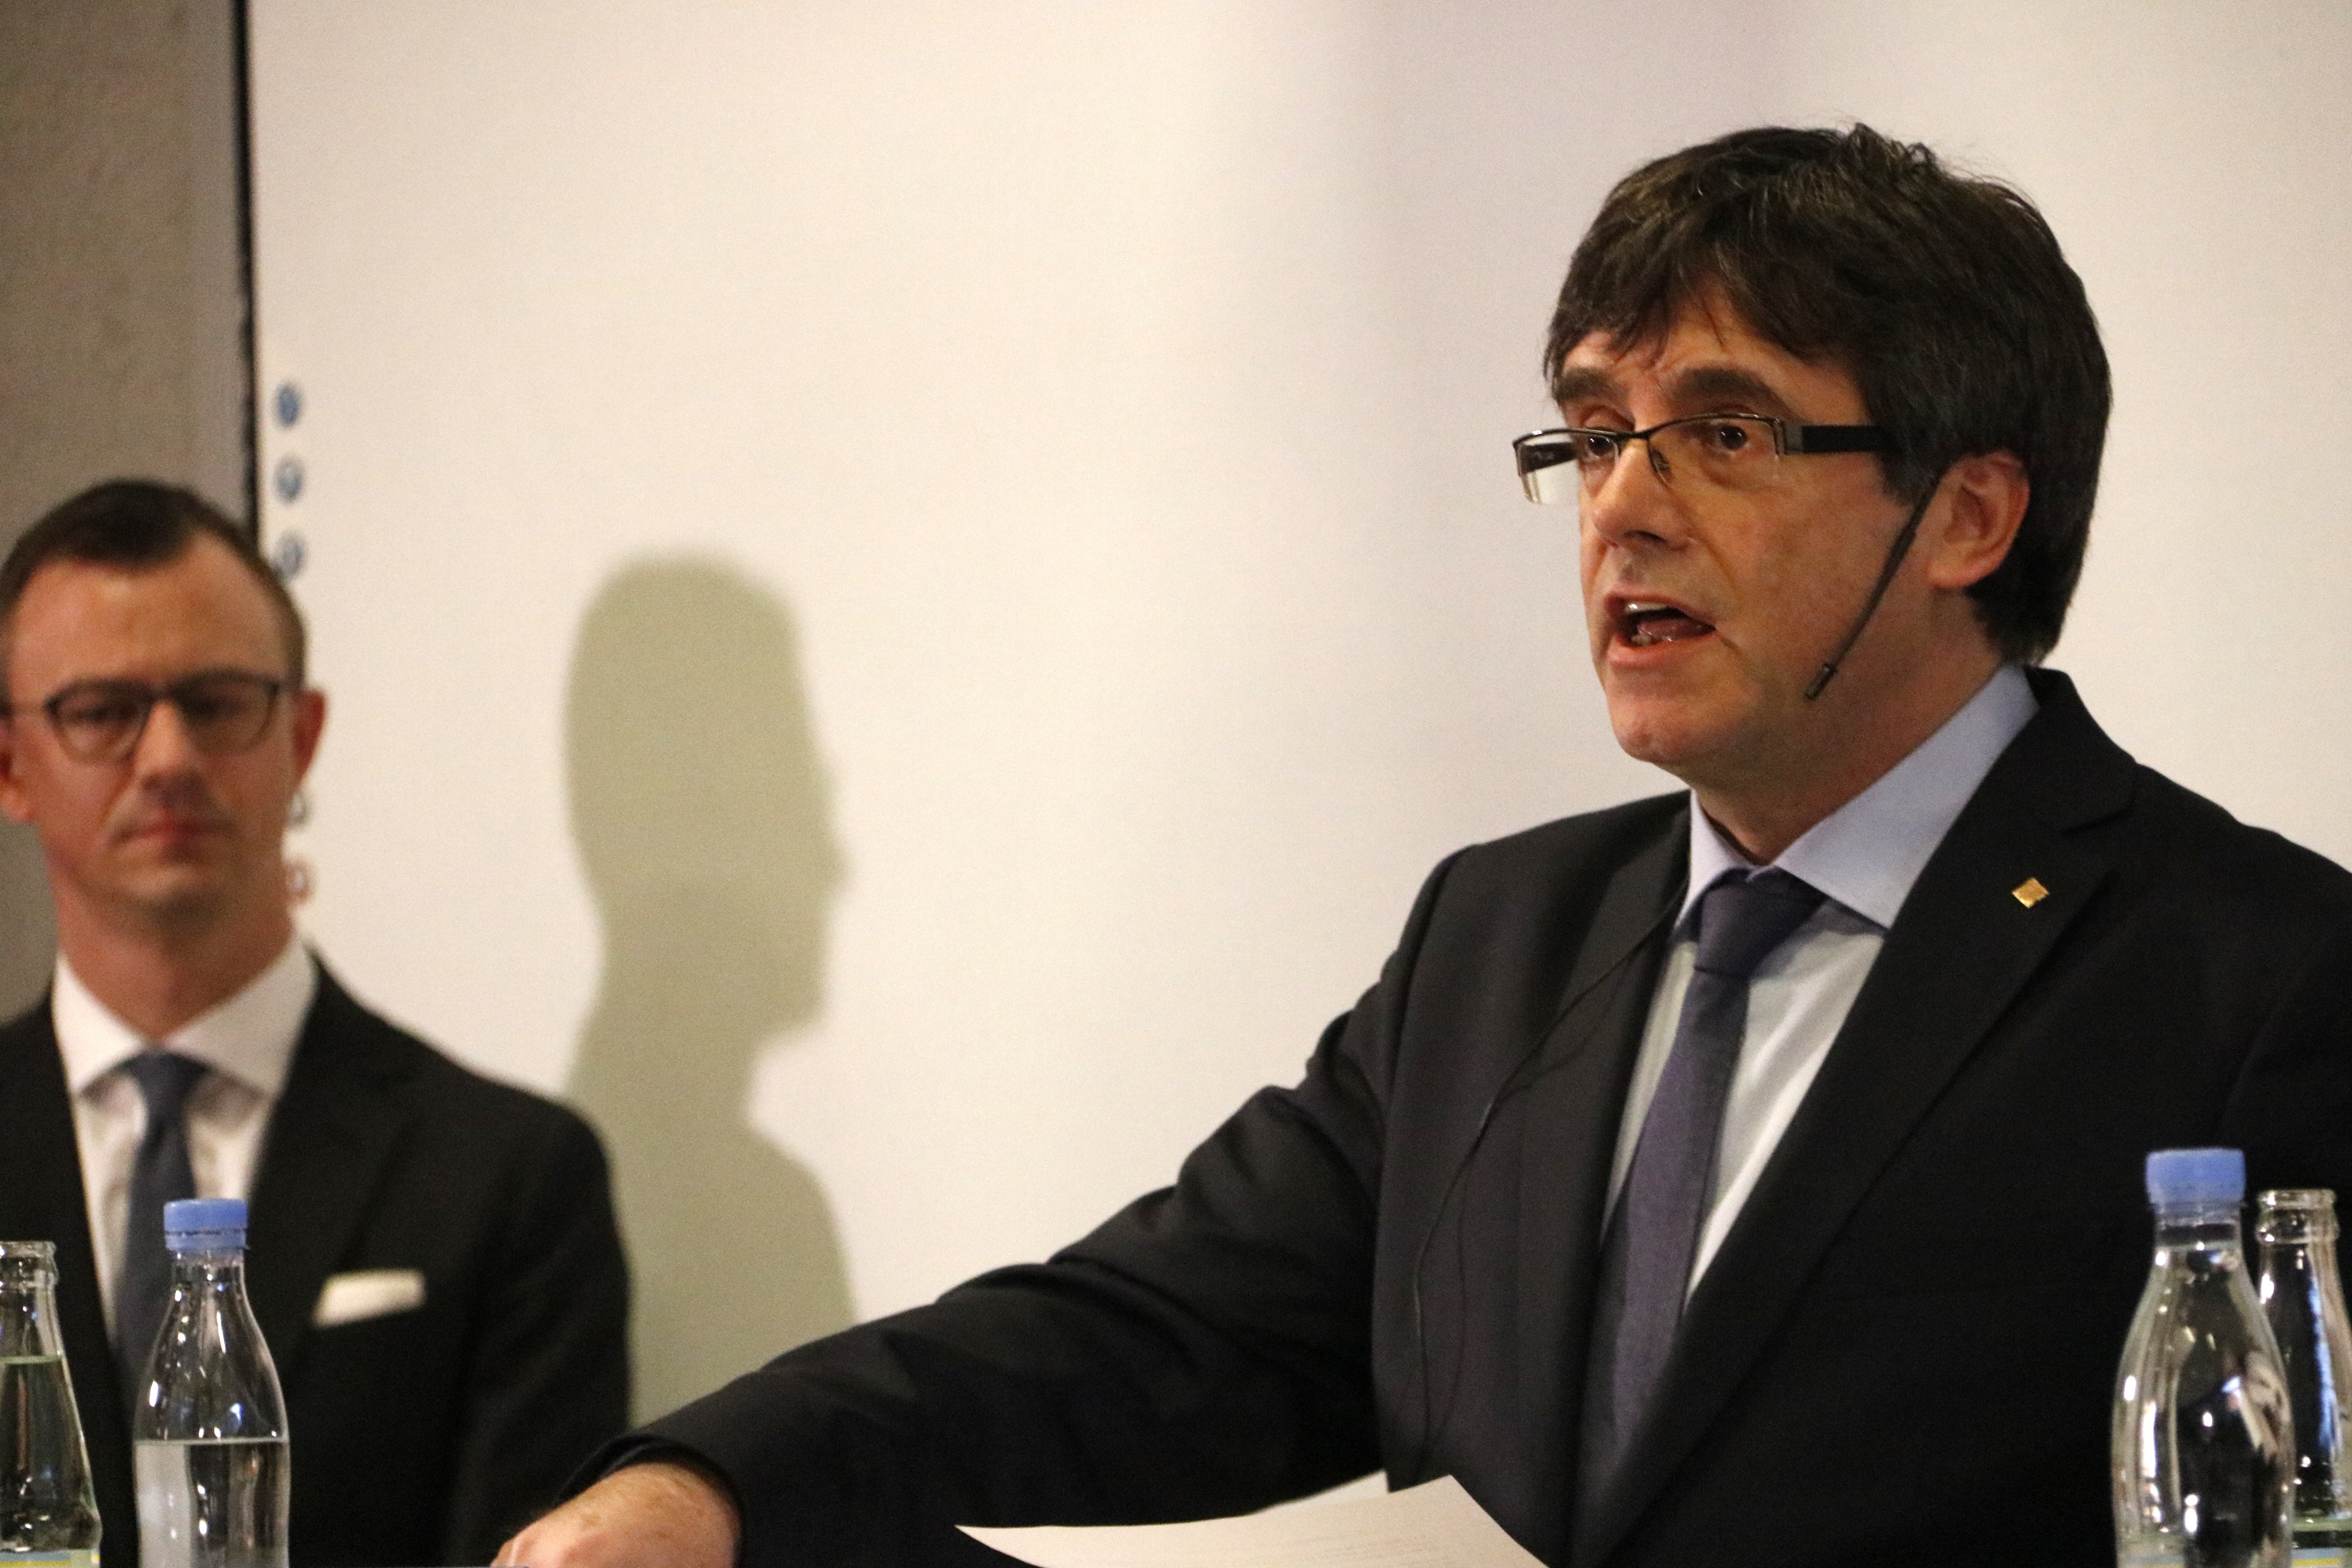 Spanish pressure derails event with Puigdemont at Mexican university